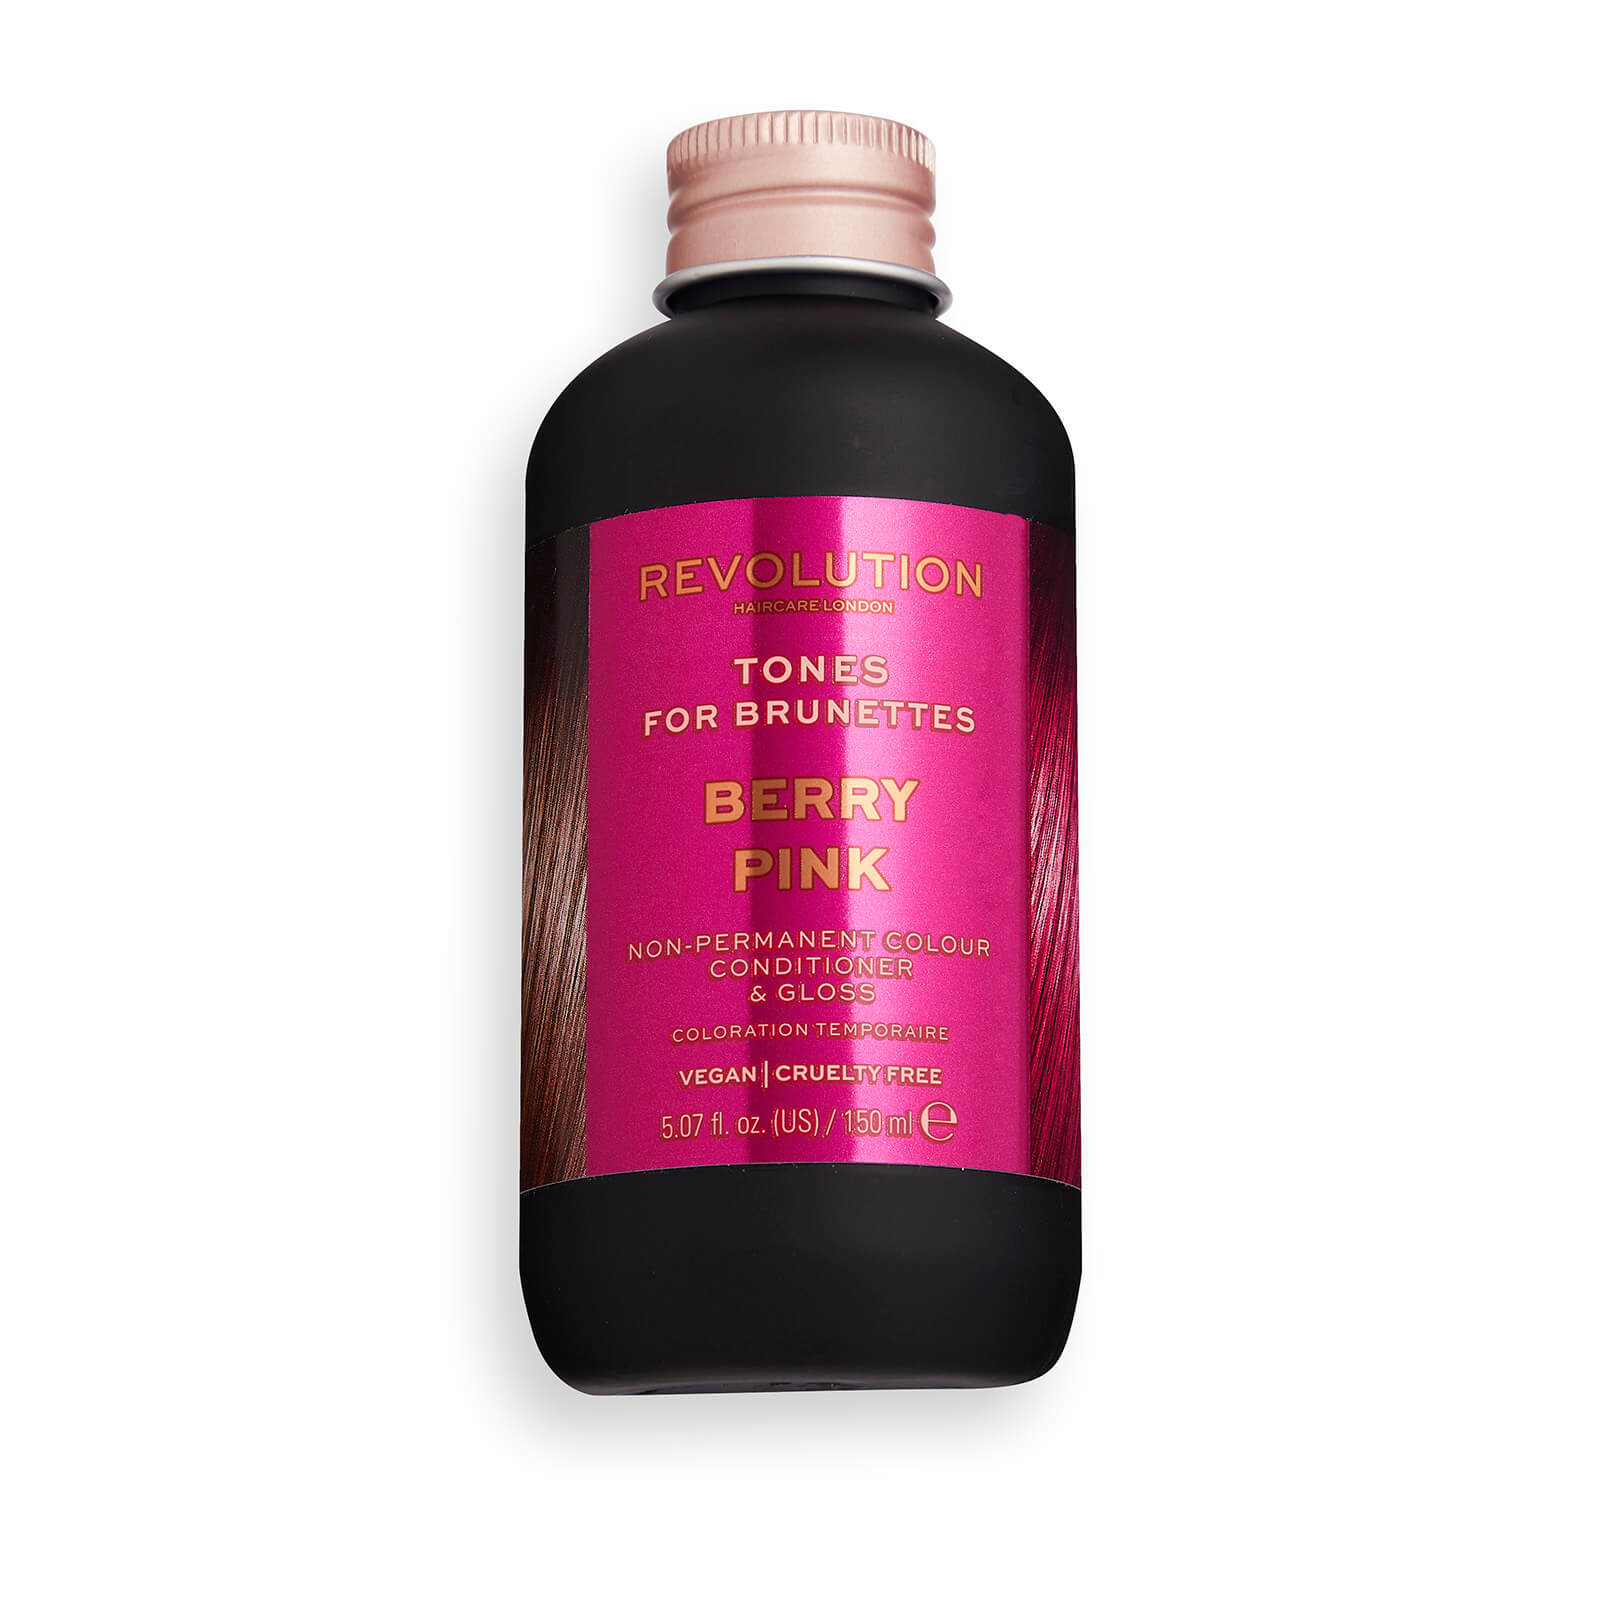 Revolution Hair Tones for Brunettes 150ml (Various Shades) - Berry Pink